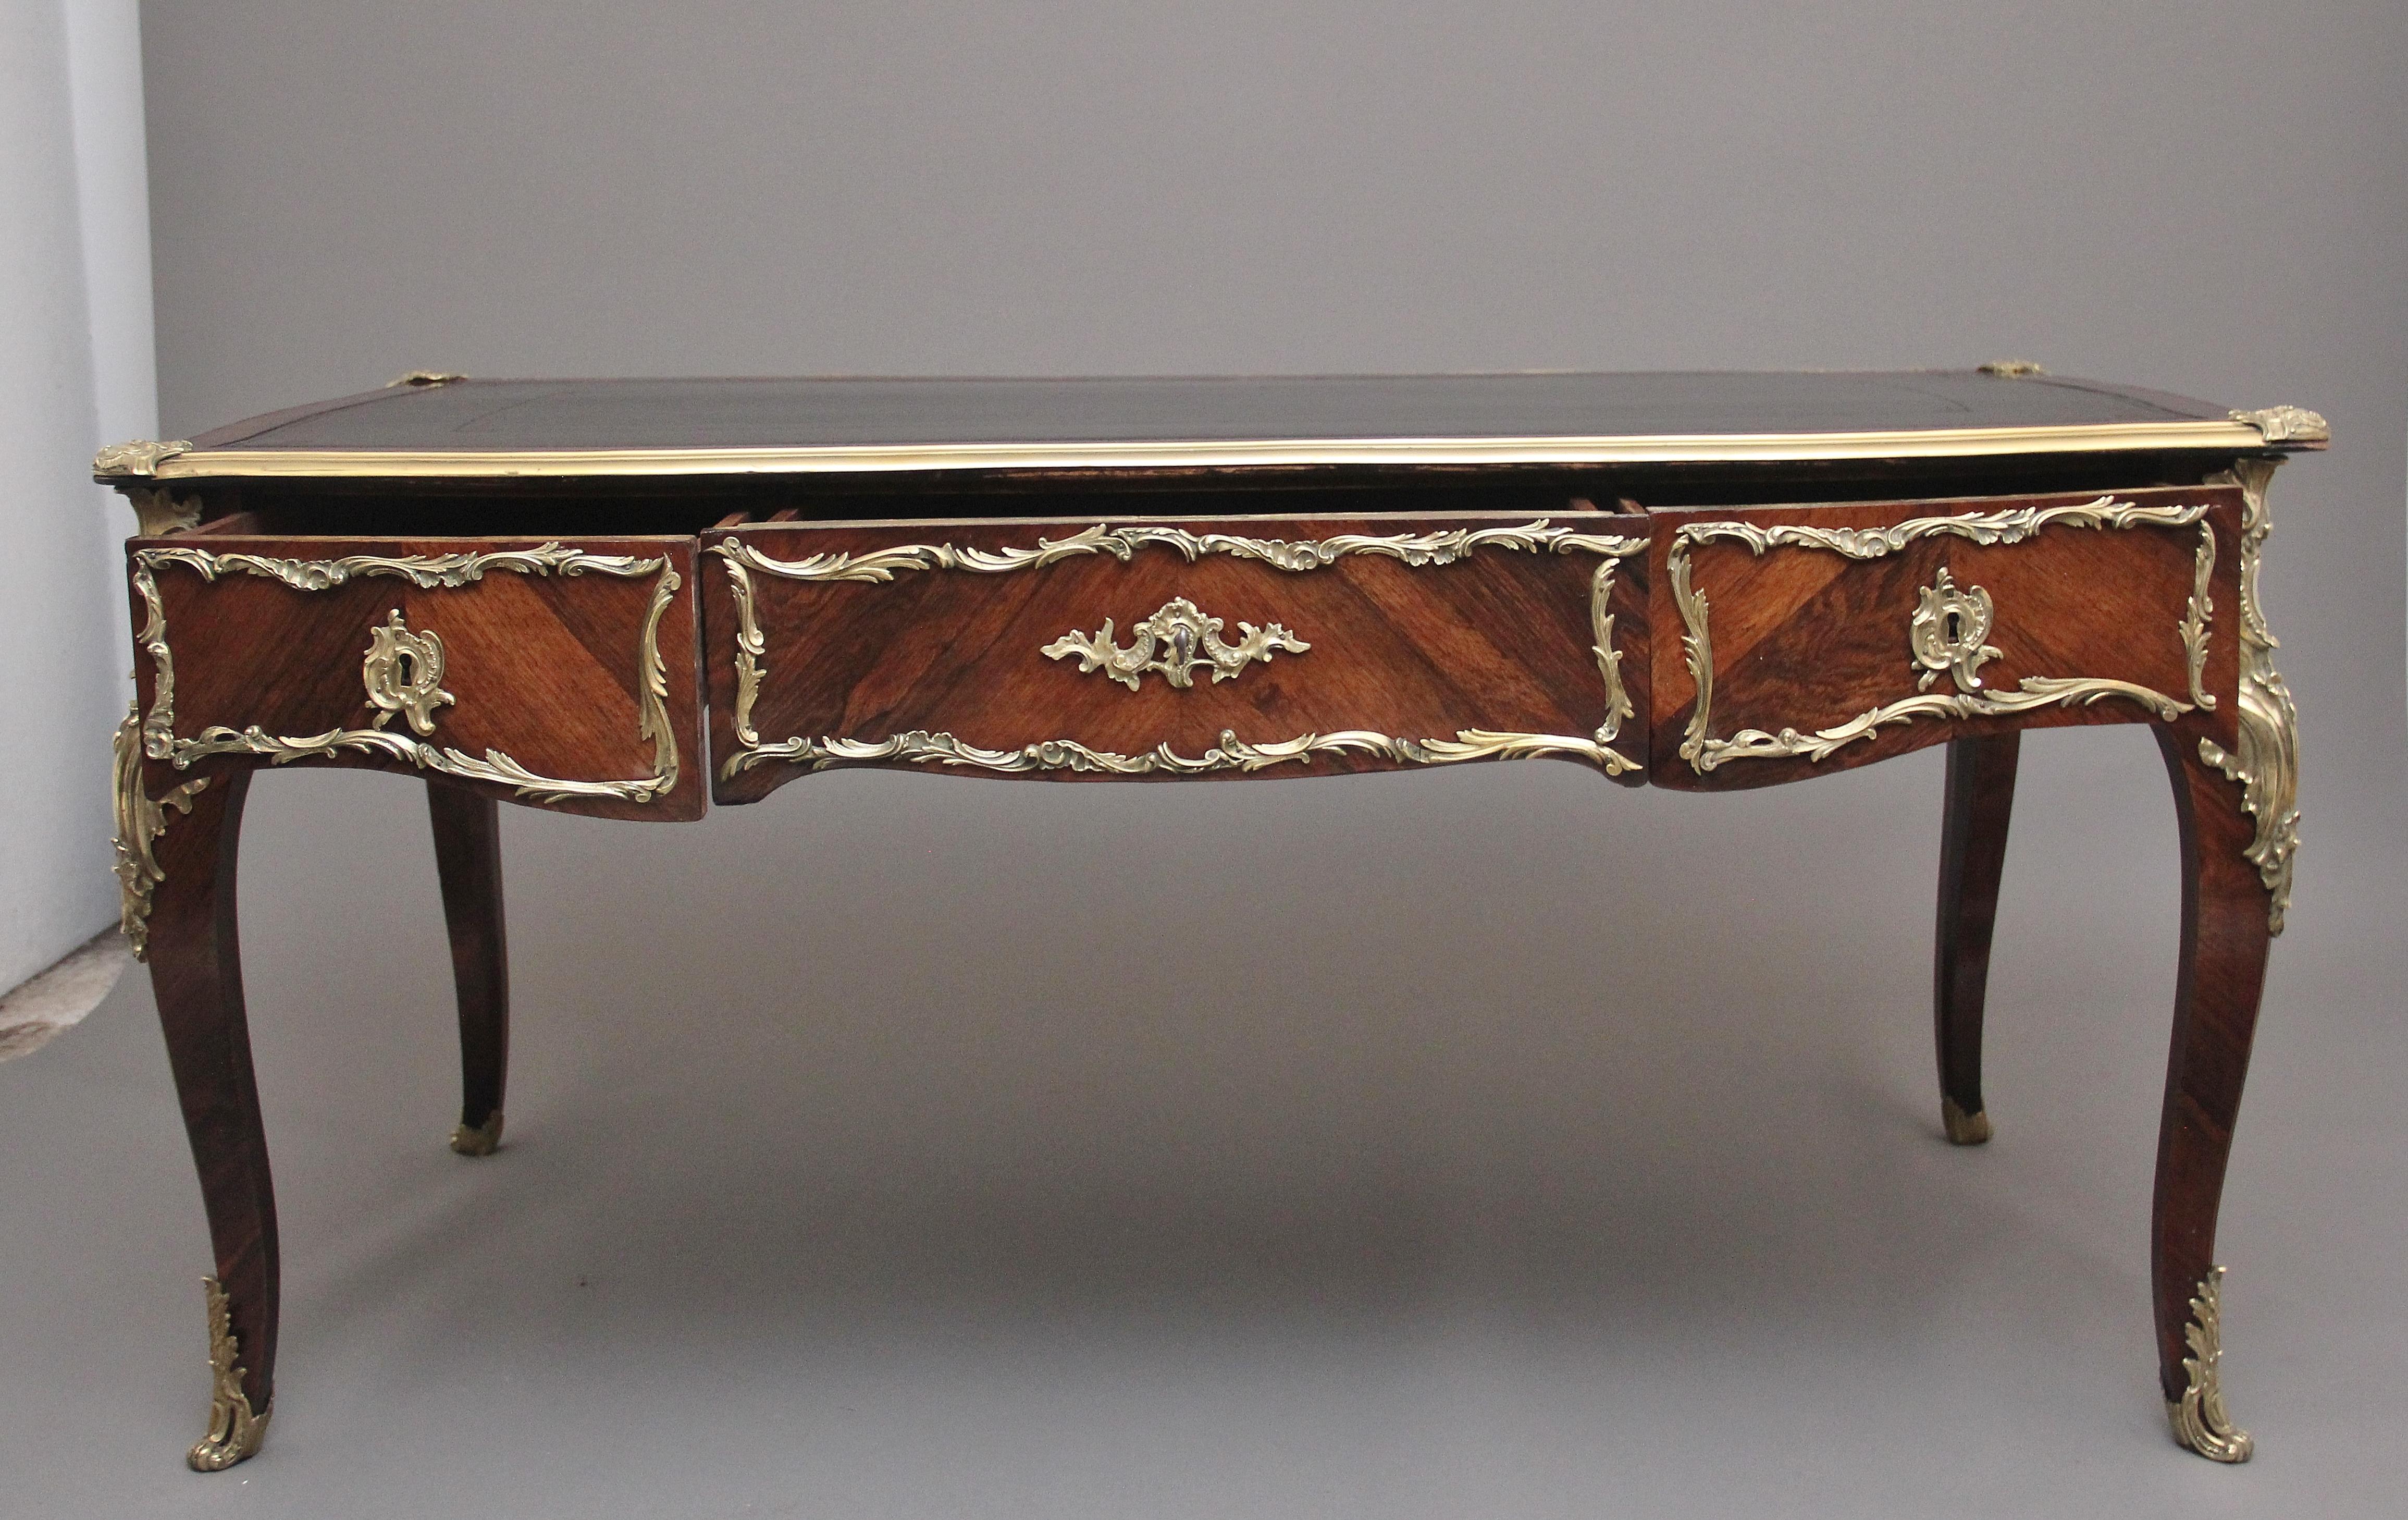 A superb quality 19th century French Kingwood and ormolu mounted bureau-plat desk, having a shaped top with an ormolu moulded edge, decorative shell engraved corner mounts, kingwood cross banding around the edge and a green leather writing surface